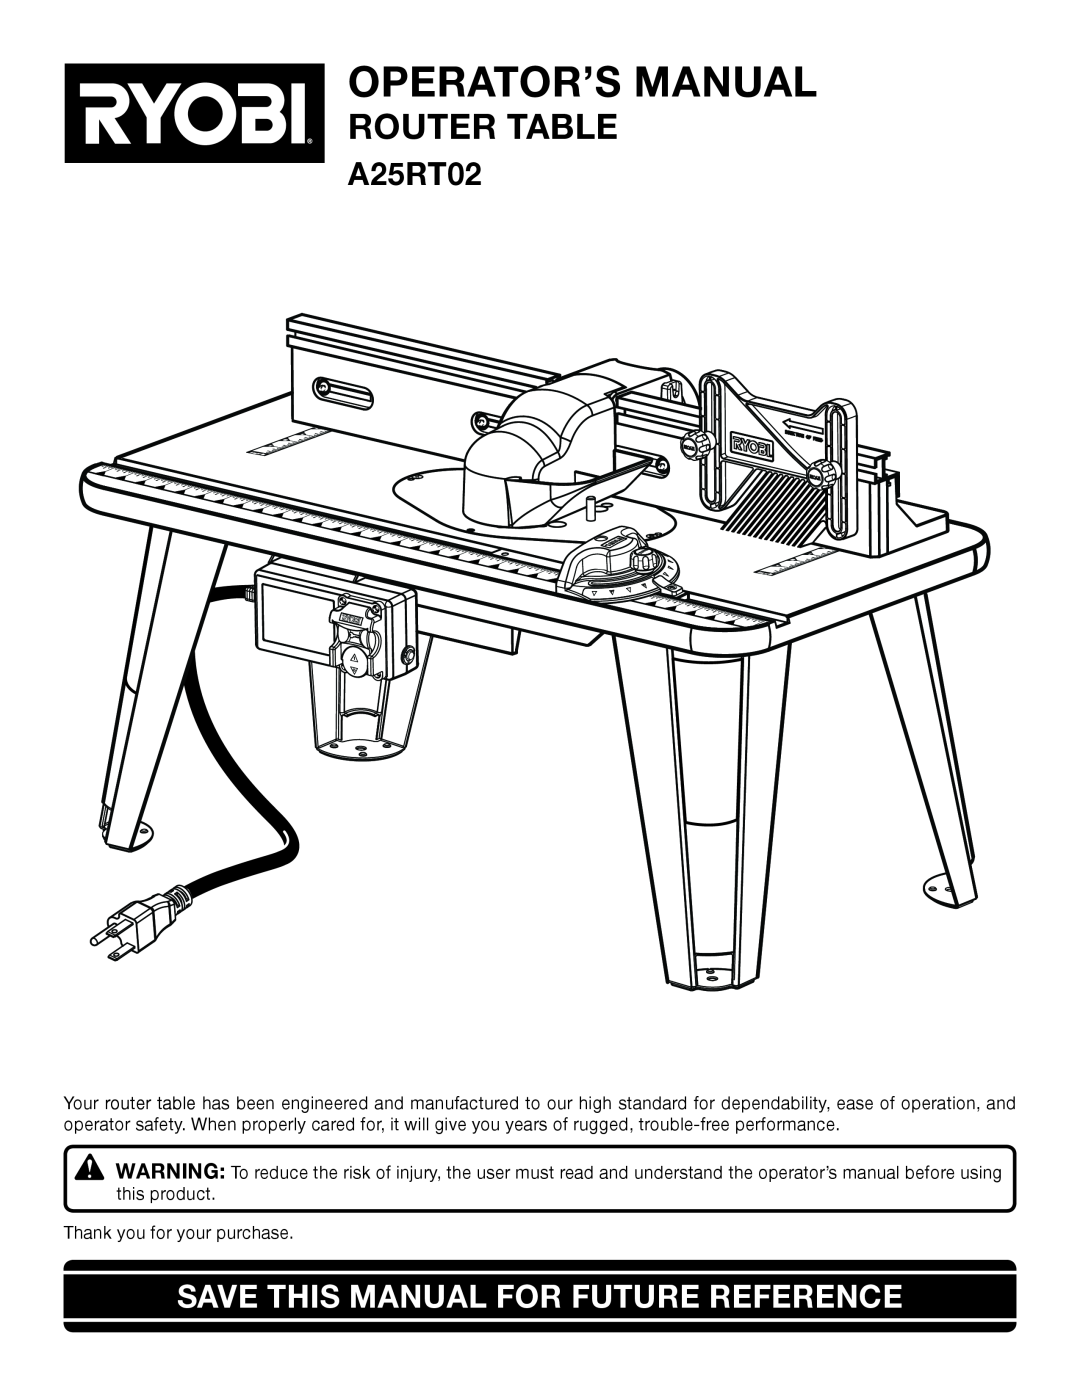 Ryobi A25RT02 manual Operator’S Manual, Router Table, Save This Manual For Future Reference 